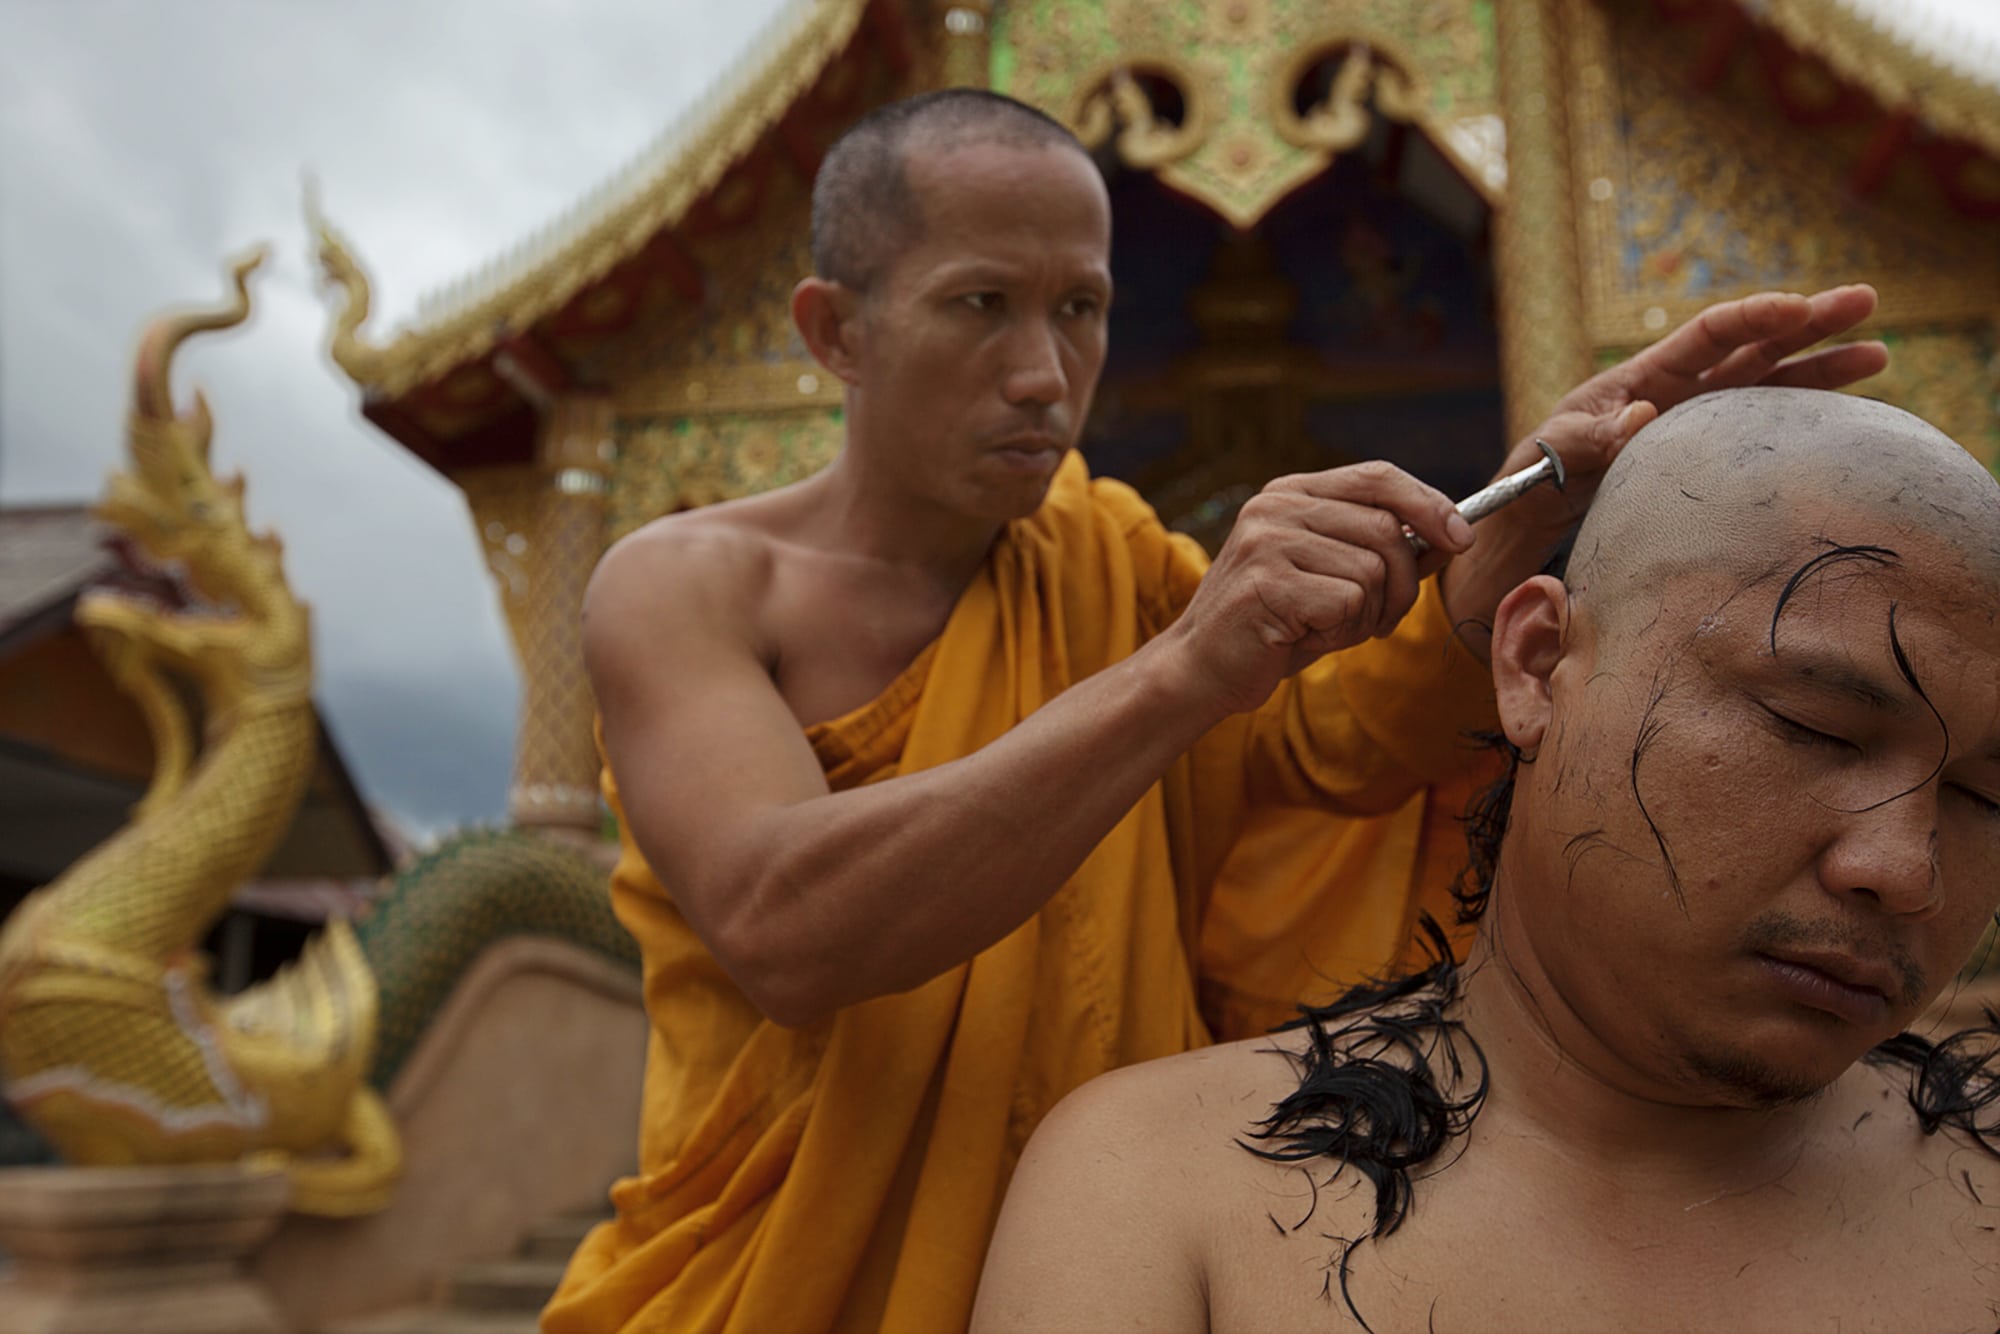 A monk shaving another monk's hair